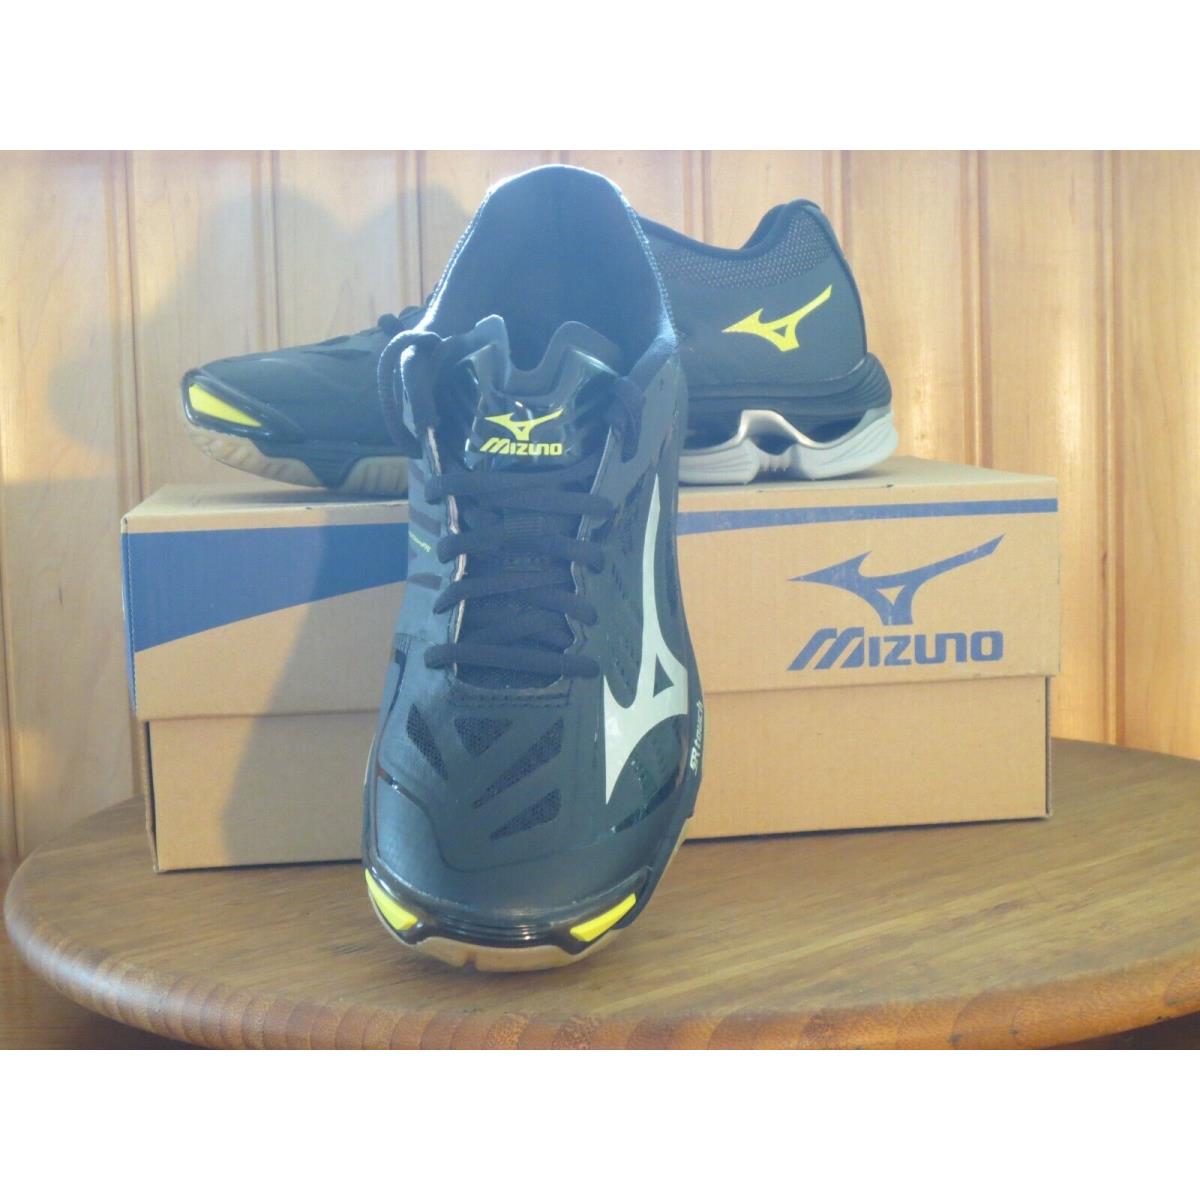 Mizuno Women`s Wave Lightning Z2 Volleyball Shoes Sneakers Sizes 6 6.5 11.5 US 6.5